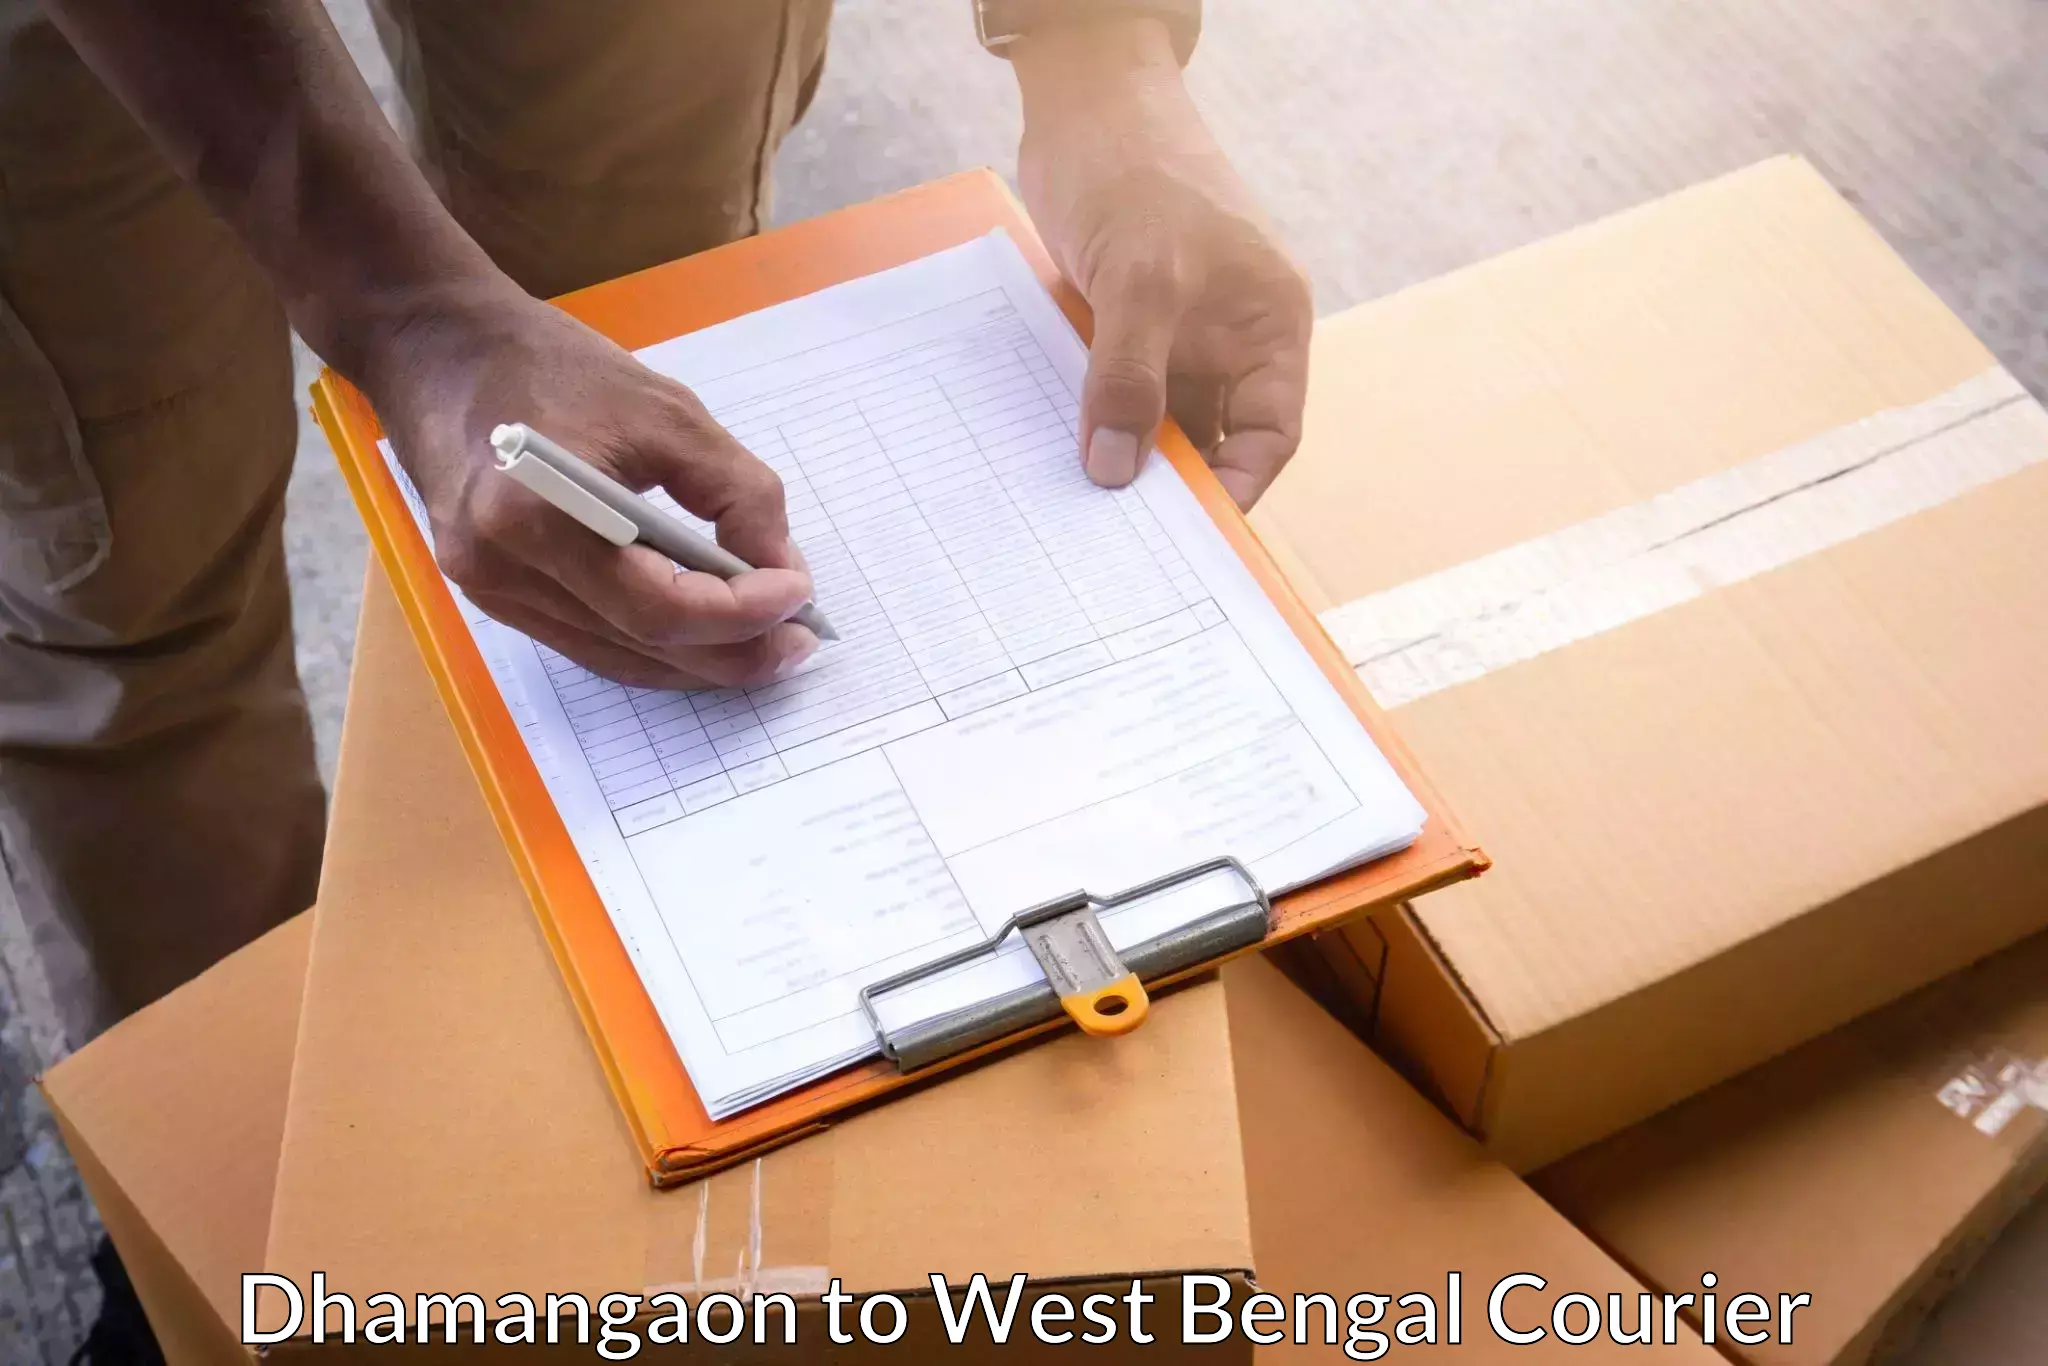 Optimized delivery routes in Dhamangaon to Bongaon